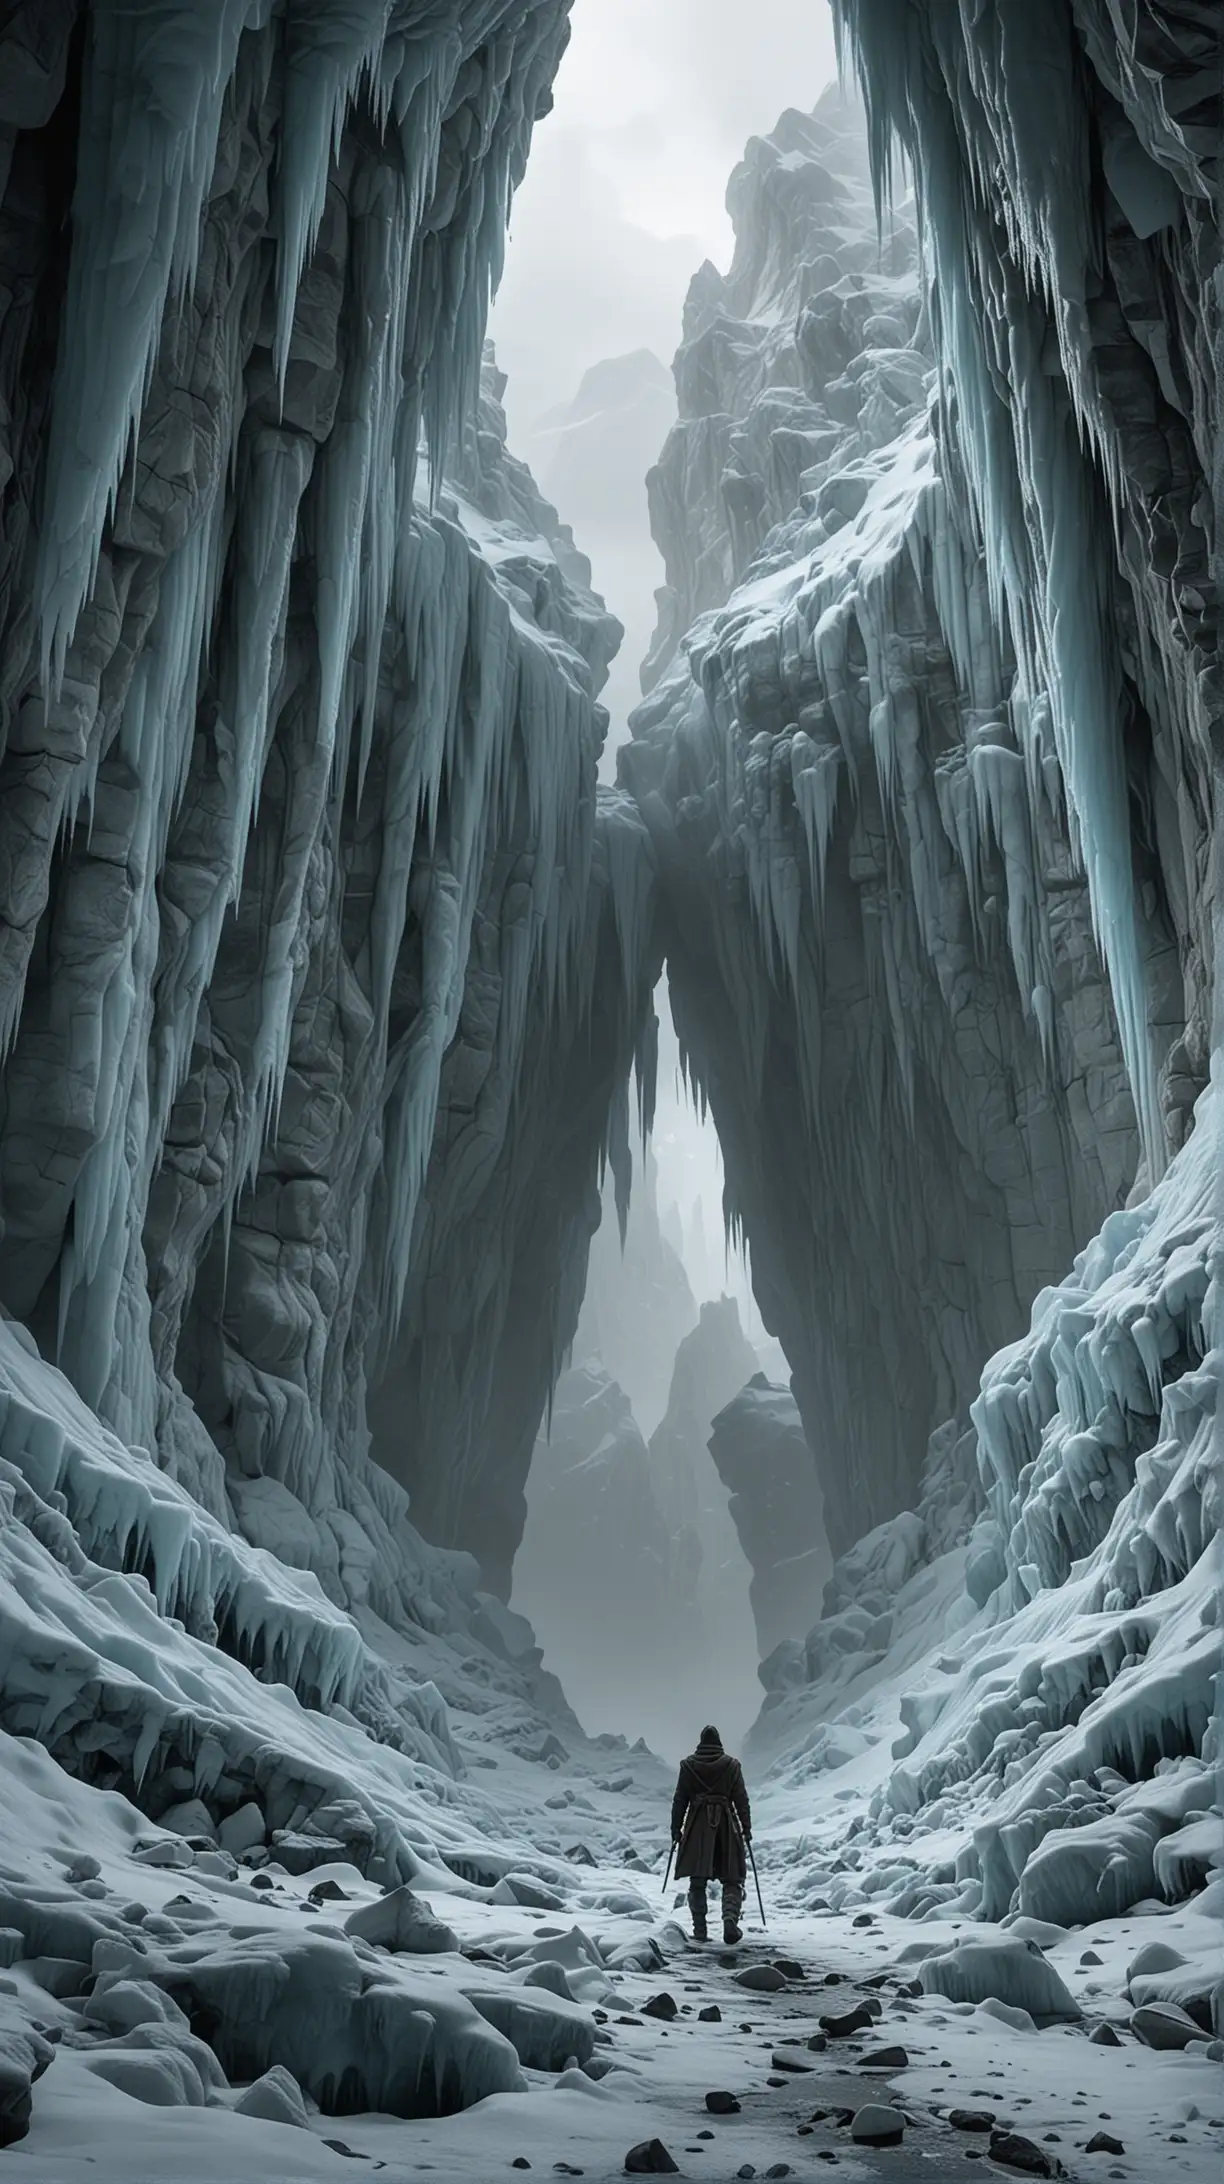  A figure stands amidst towering glaciers and frozen landscapes, their breath forming clouds of mist in the frigid air. Yet, lurking within the frozen depths, shadowy figures begin to emerge, their icy fingers reaching out to ensnare the figure in their icy grasp as they confront the frozen dread of eternal winter.